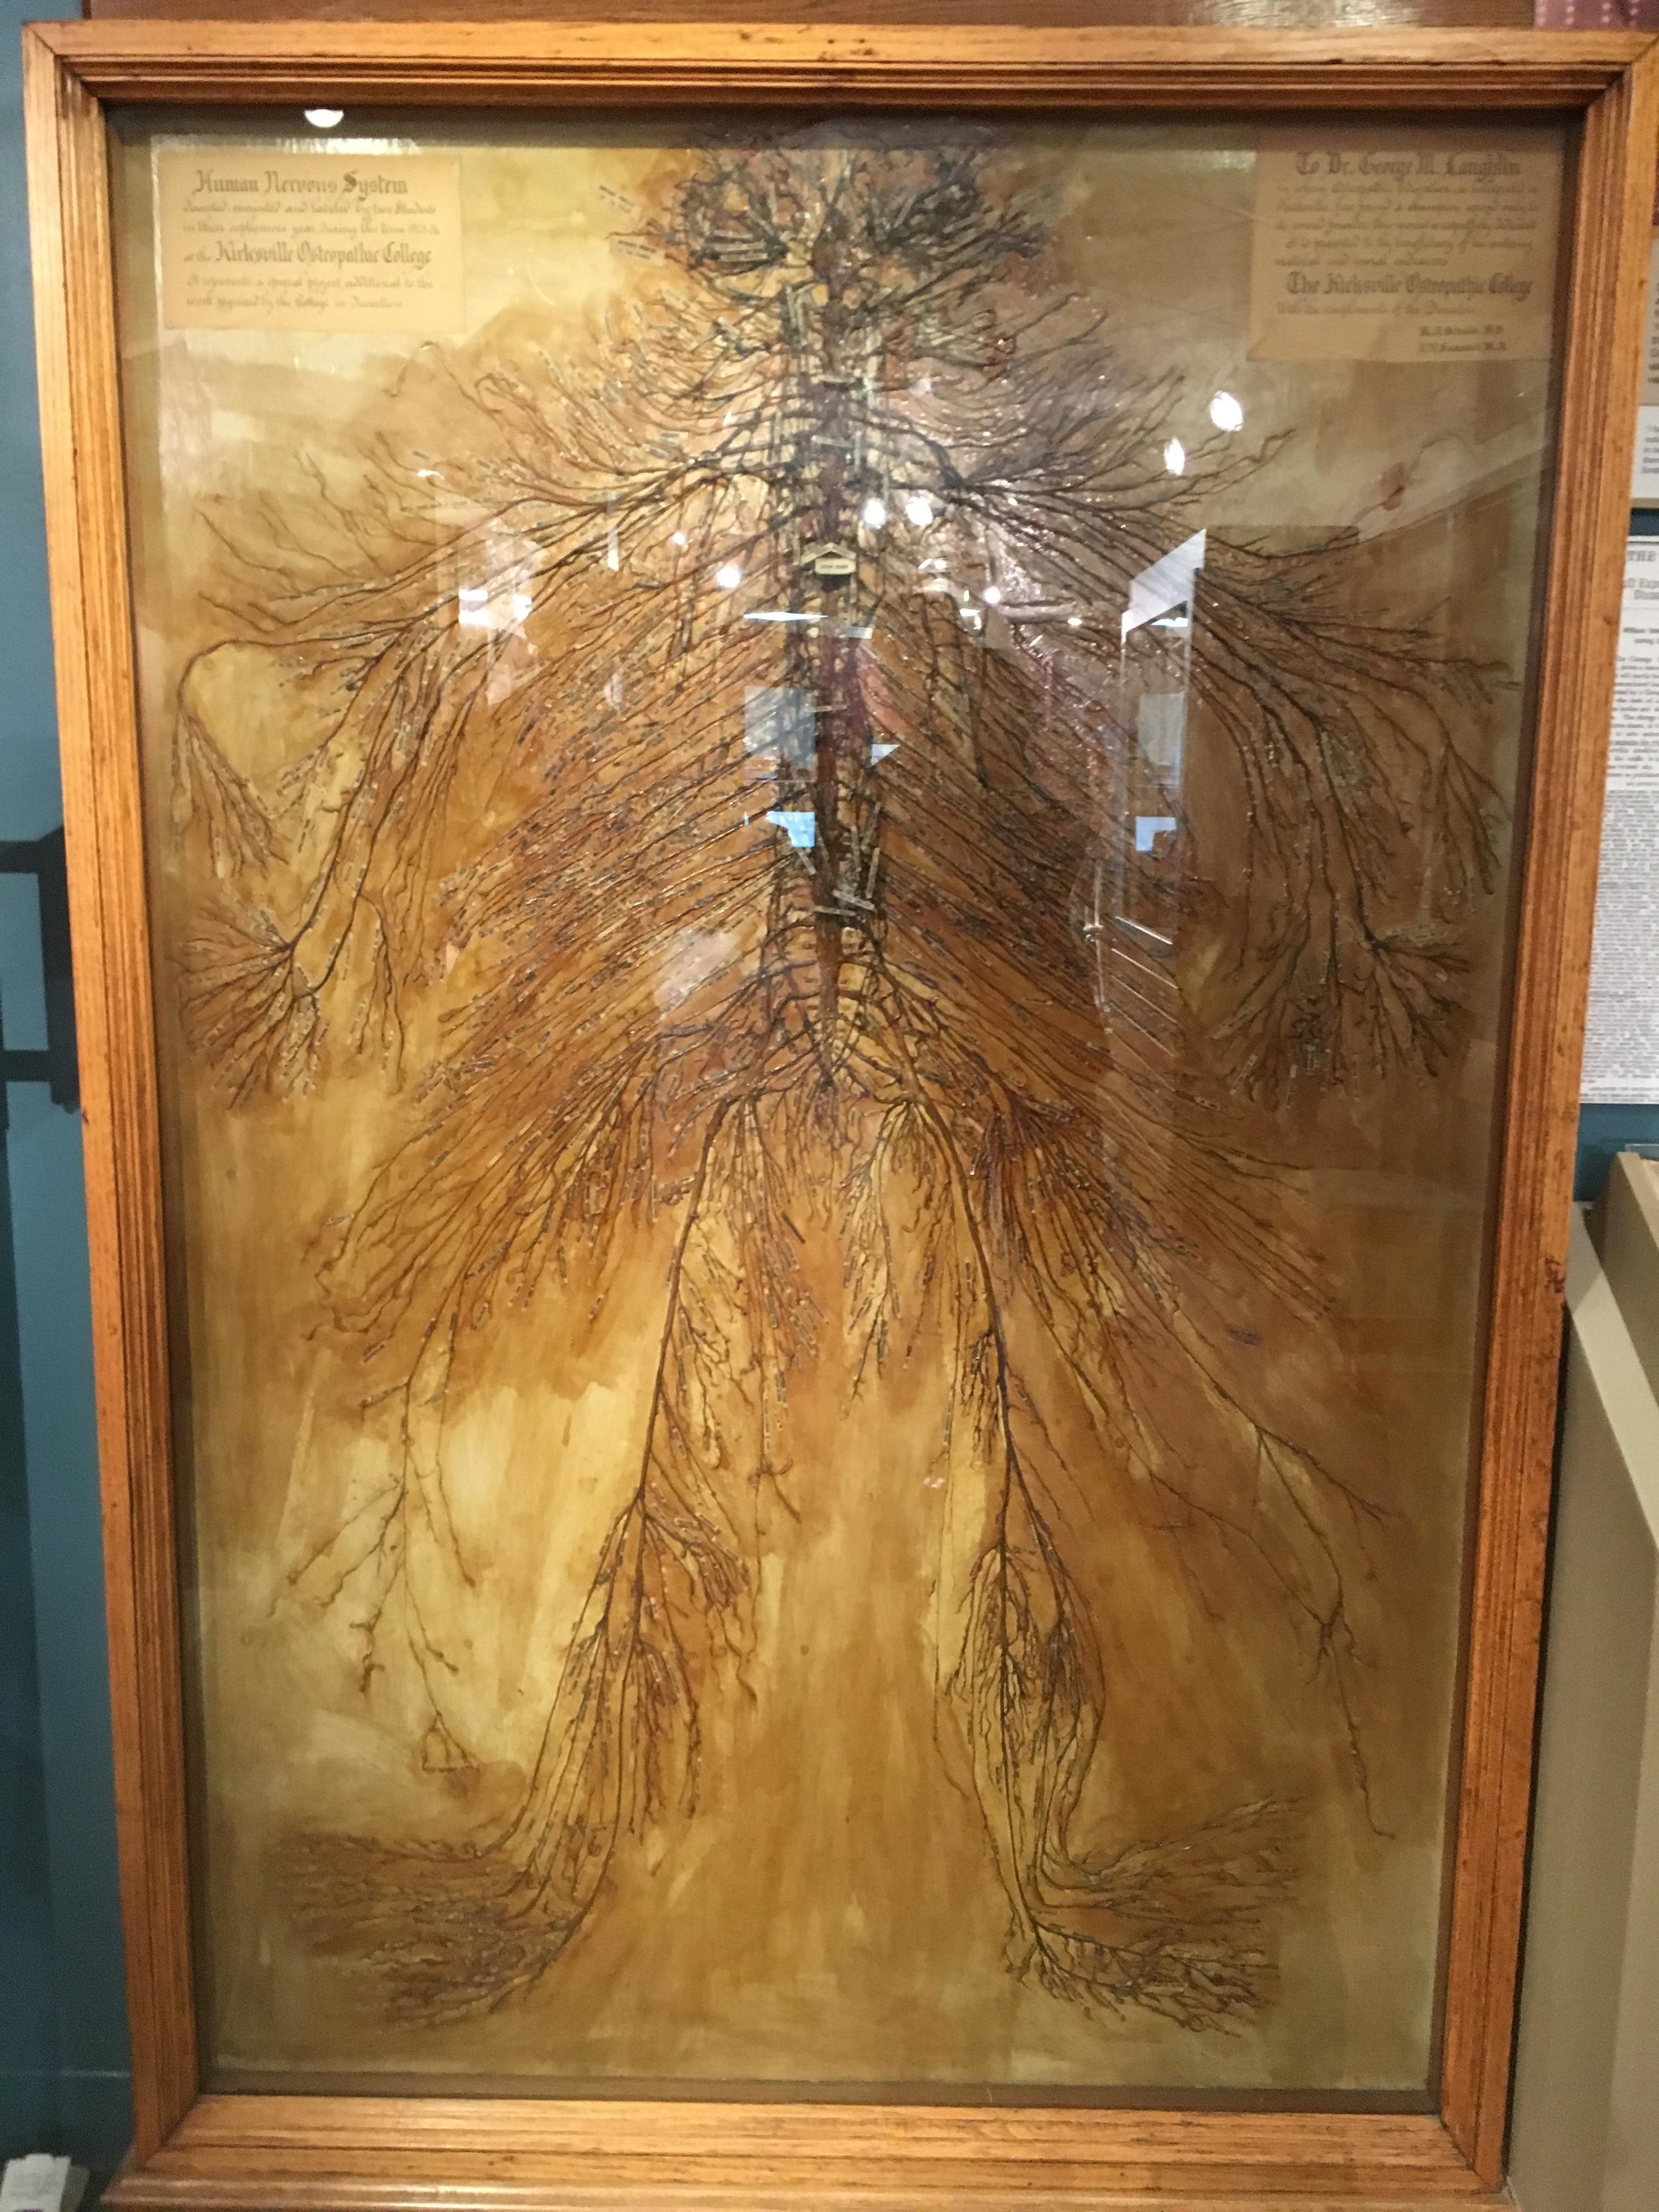 A framed image of the branches of the nervous system following the shape of a human body